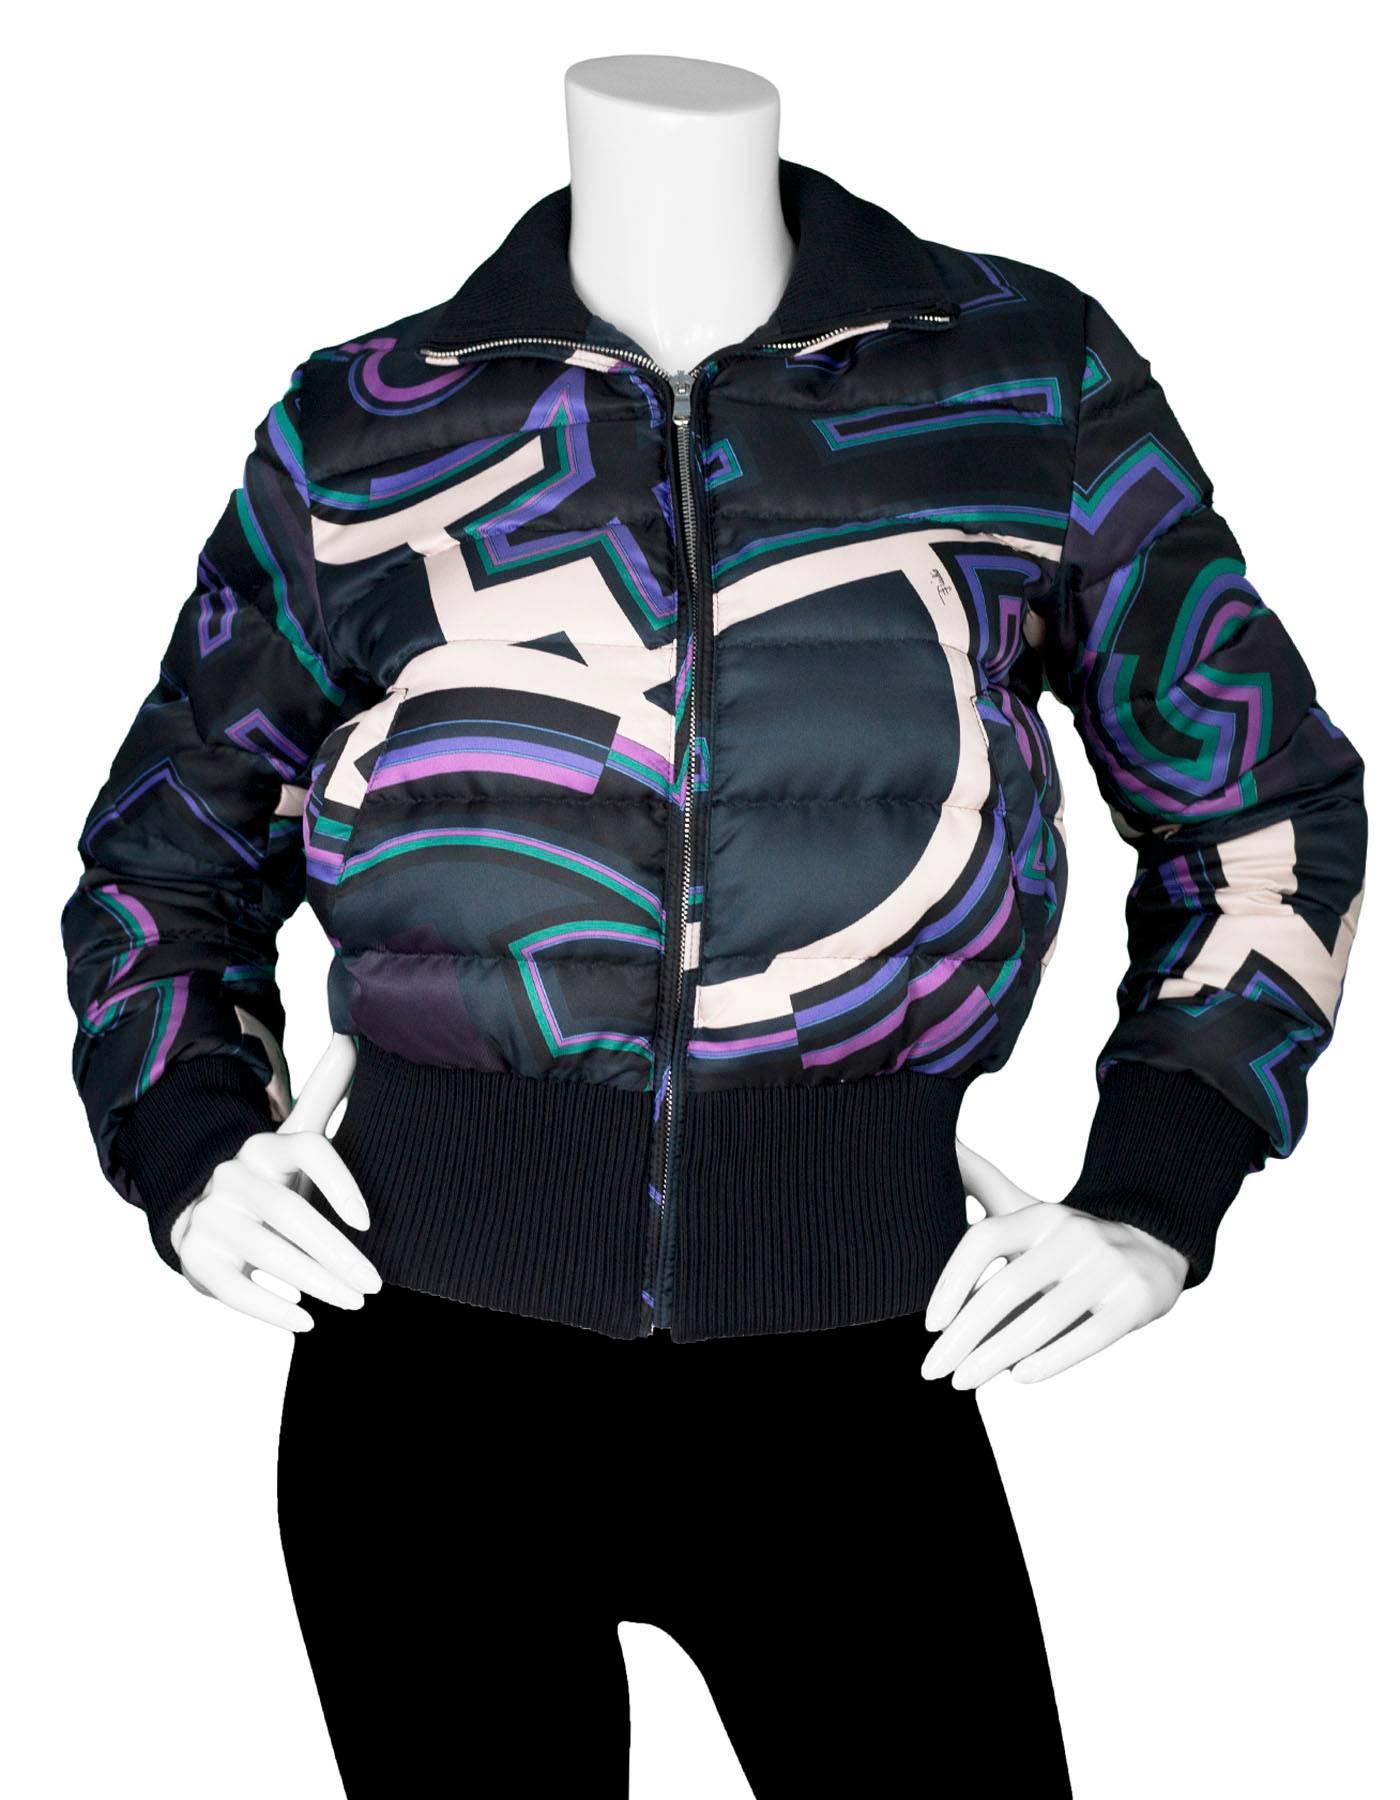 Emilio Pucci Black Printed Puffer Jacket

Made In: Romania
Color: Black, purple, green and white
Composition: 100% polyester
Lining: Black, 58% nylon, 42% polyester
Closure/Opening: Zip down front closure
Exterior Pockets: Two hip pockets
Interior